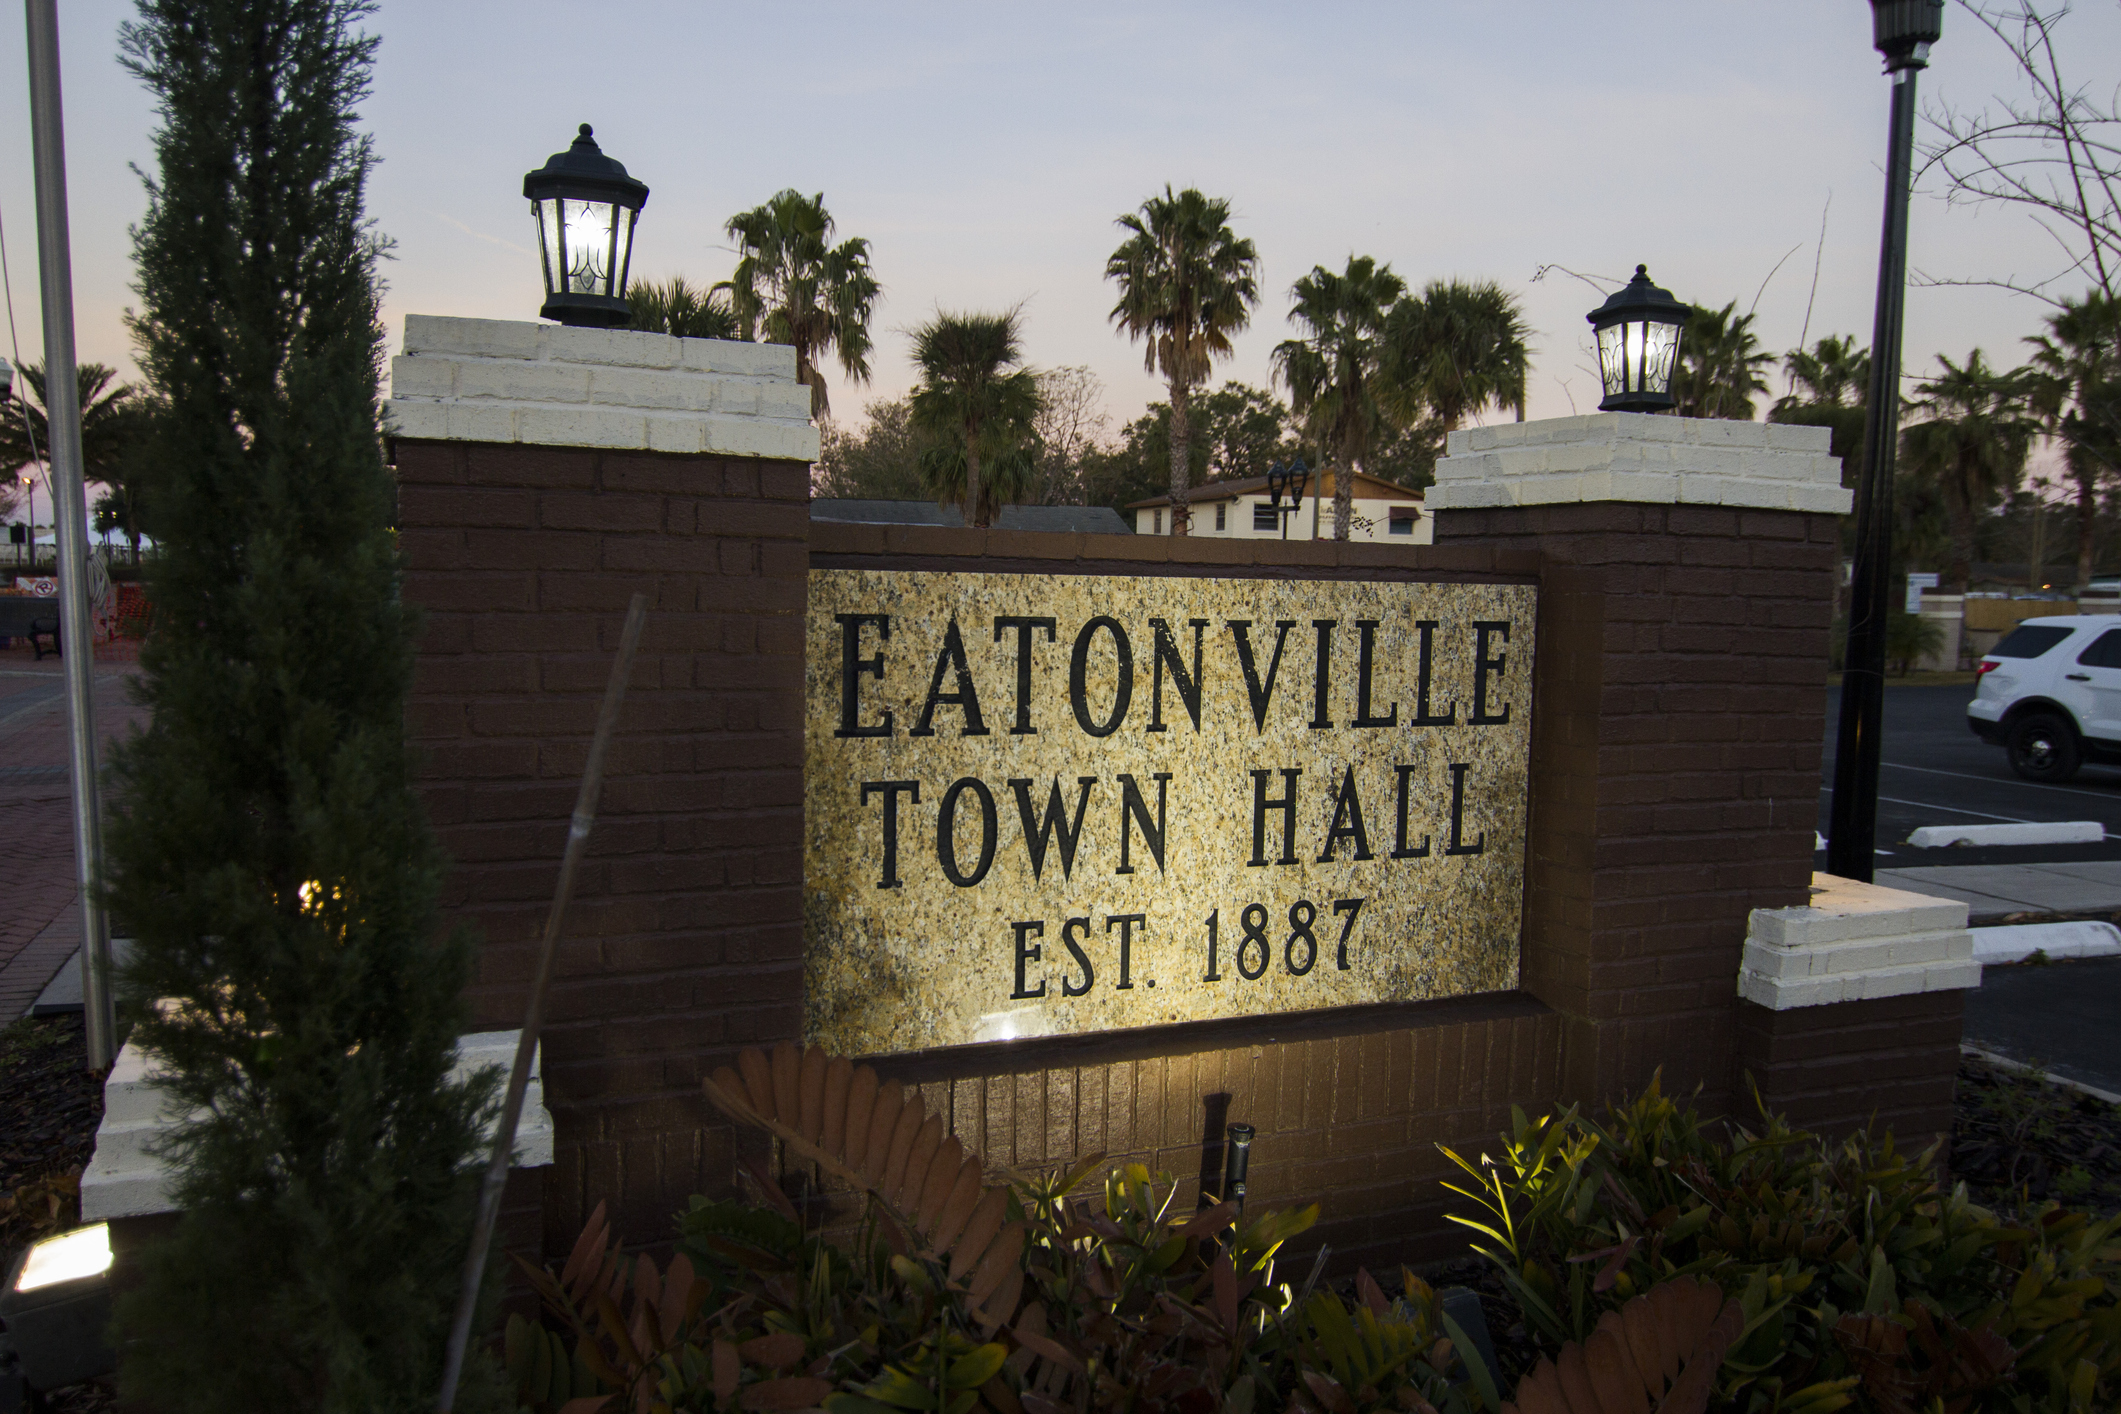 The Eatonville Town hall entrance sign is lit up early in the morning. | aulo Almeida/Getty Images/IStock Editorial